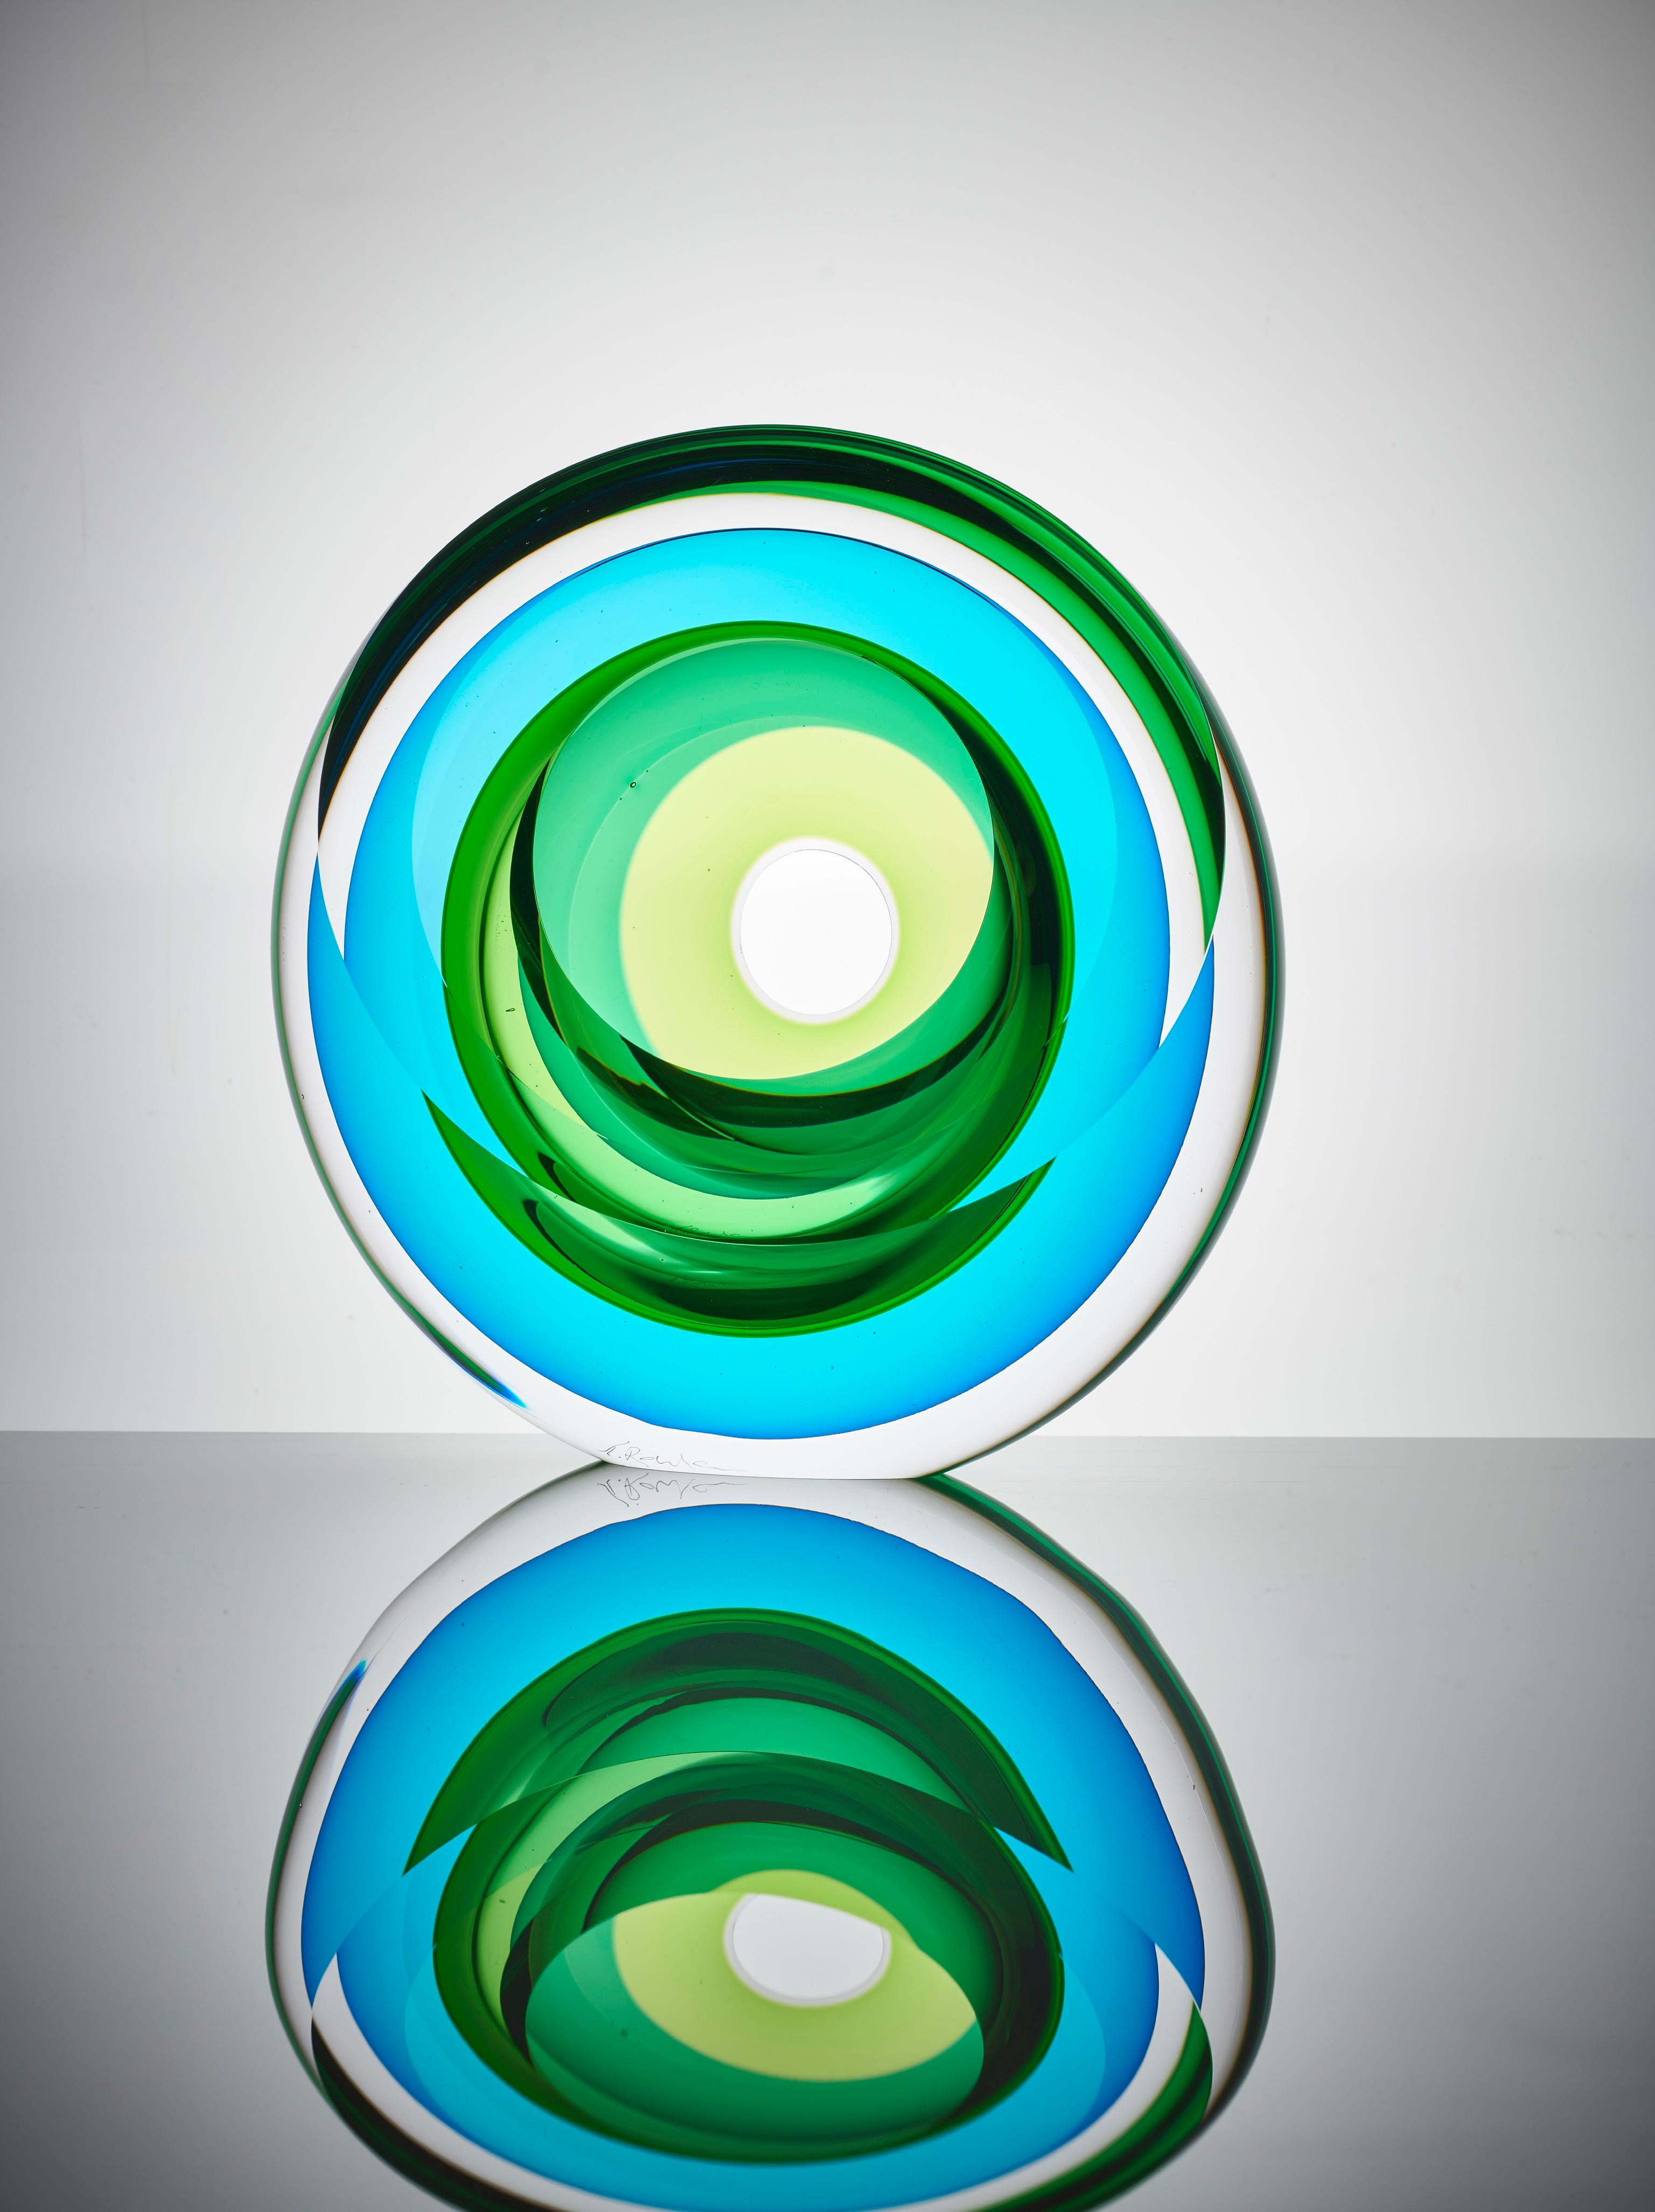 Echoes of Light, 2021 (Glass, C. 11.4 in. h x 11.4 in. w x 4.3 in. d, Object No.: 4098)

Tim Rawlinson’s fascination with the way light passes through glass informs his work. He exploits transparency, as its essential and primary quality,